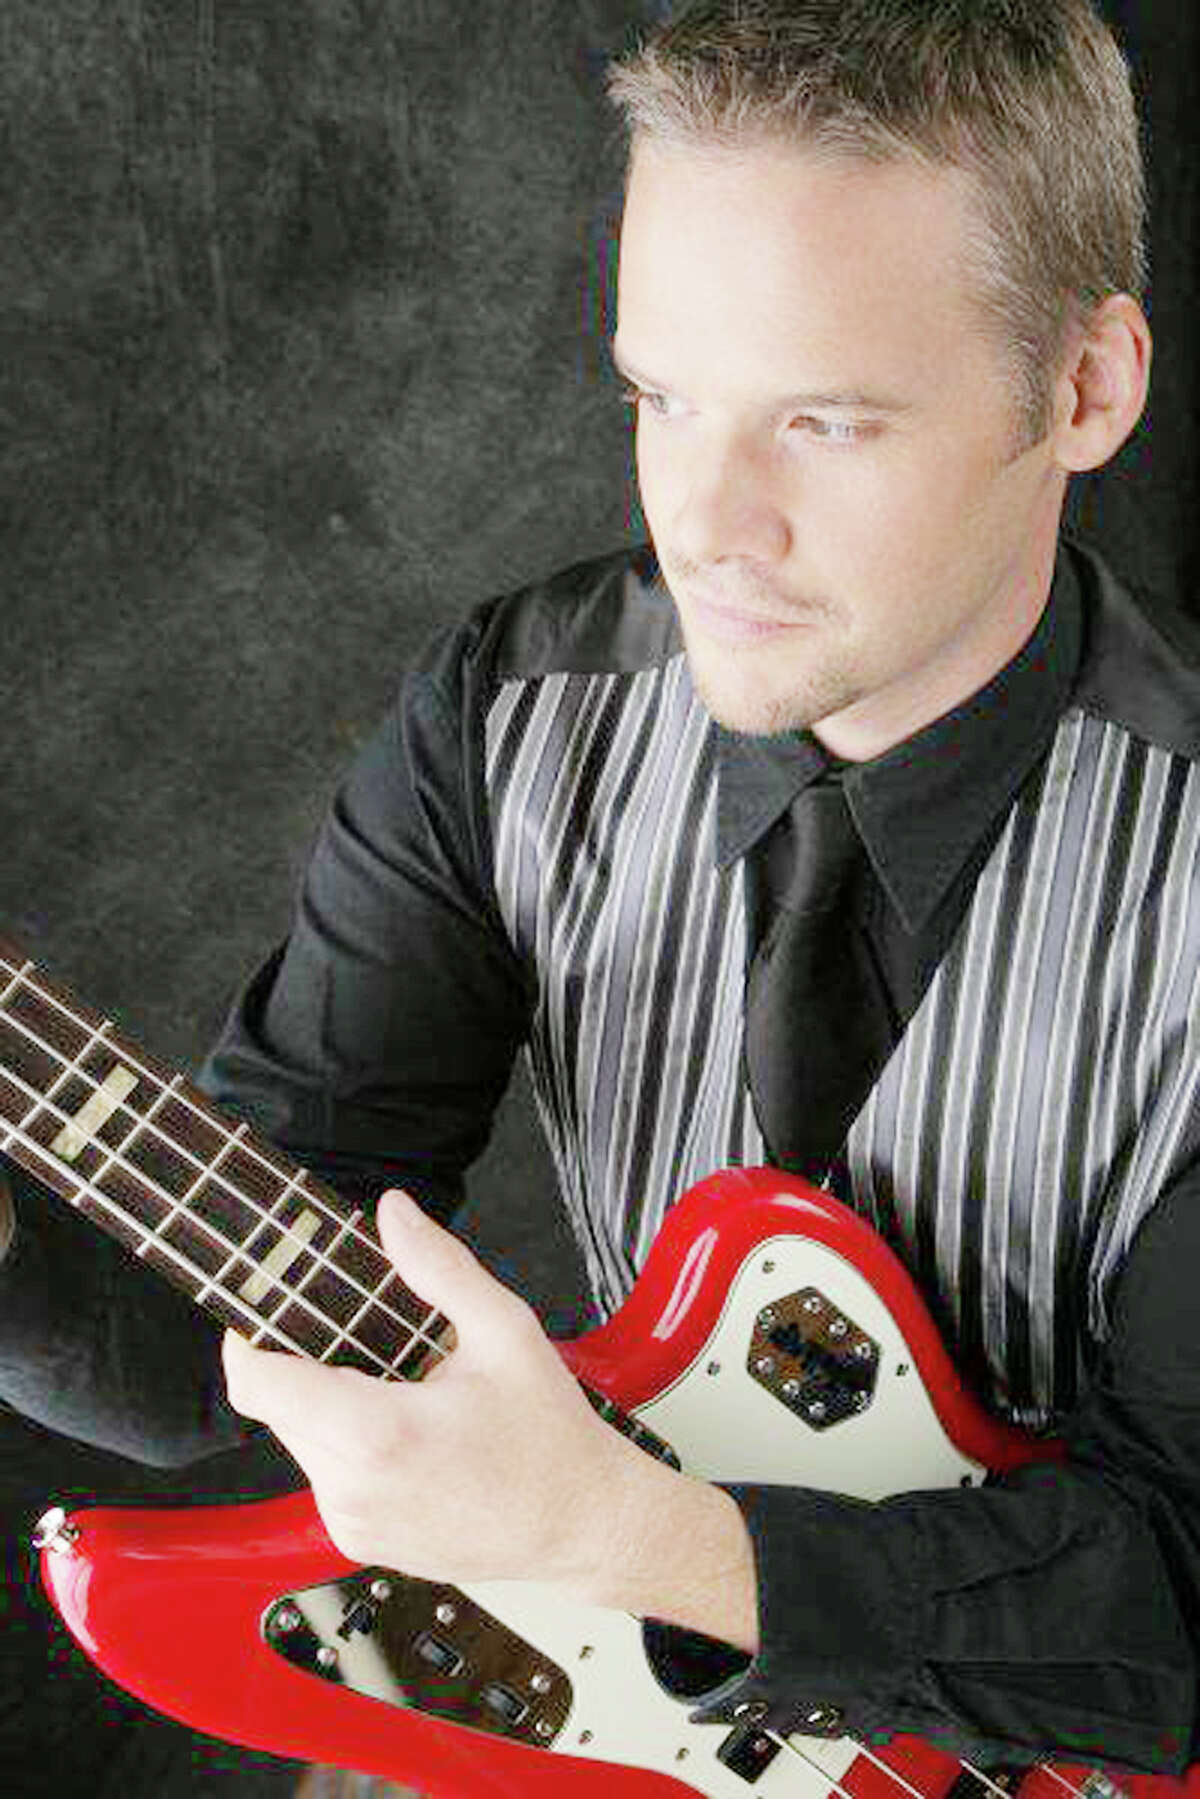 Entertaiment: Brian Nolf will be performing at the Brethren Days Celebration on August 30. Admission will start at 7 p.m.(Courtesy photo)